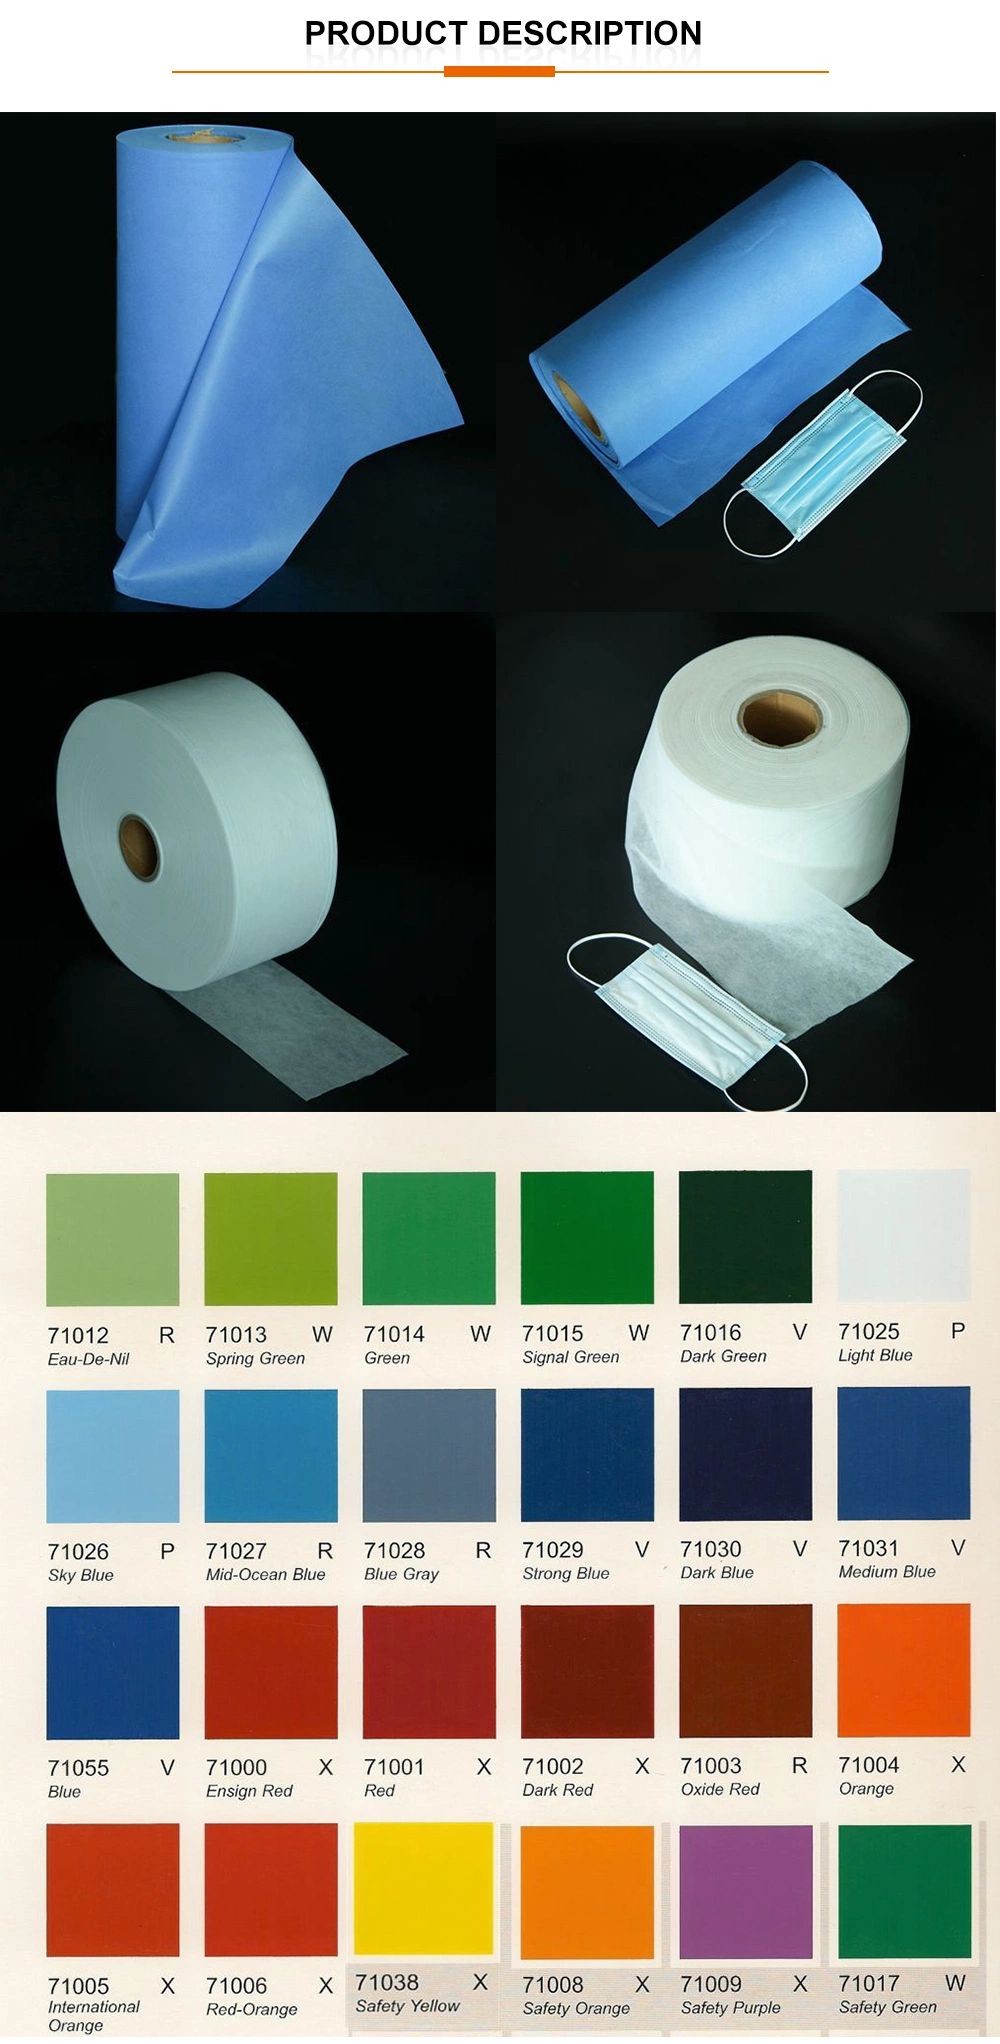 Eco Friendly Spunbond Non Woven Fabric S/Ss/SMS Raw Material Used on Eco Bags